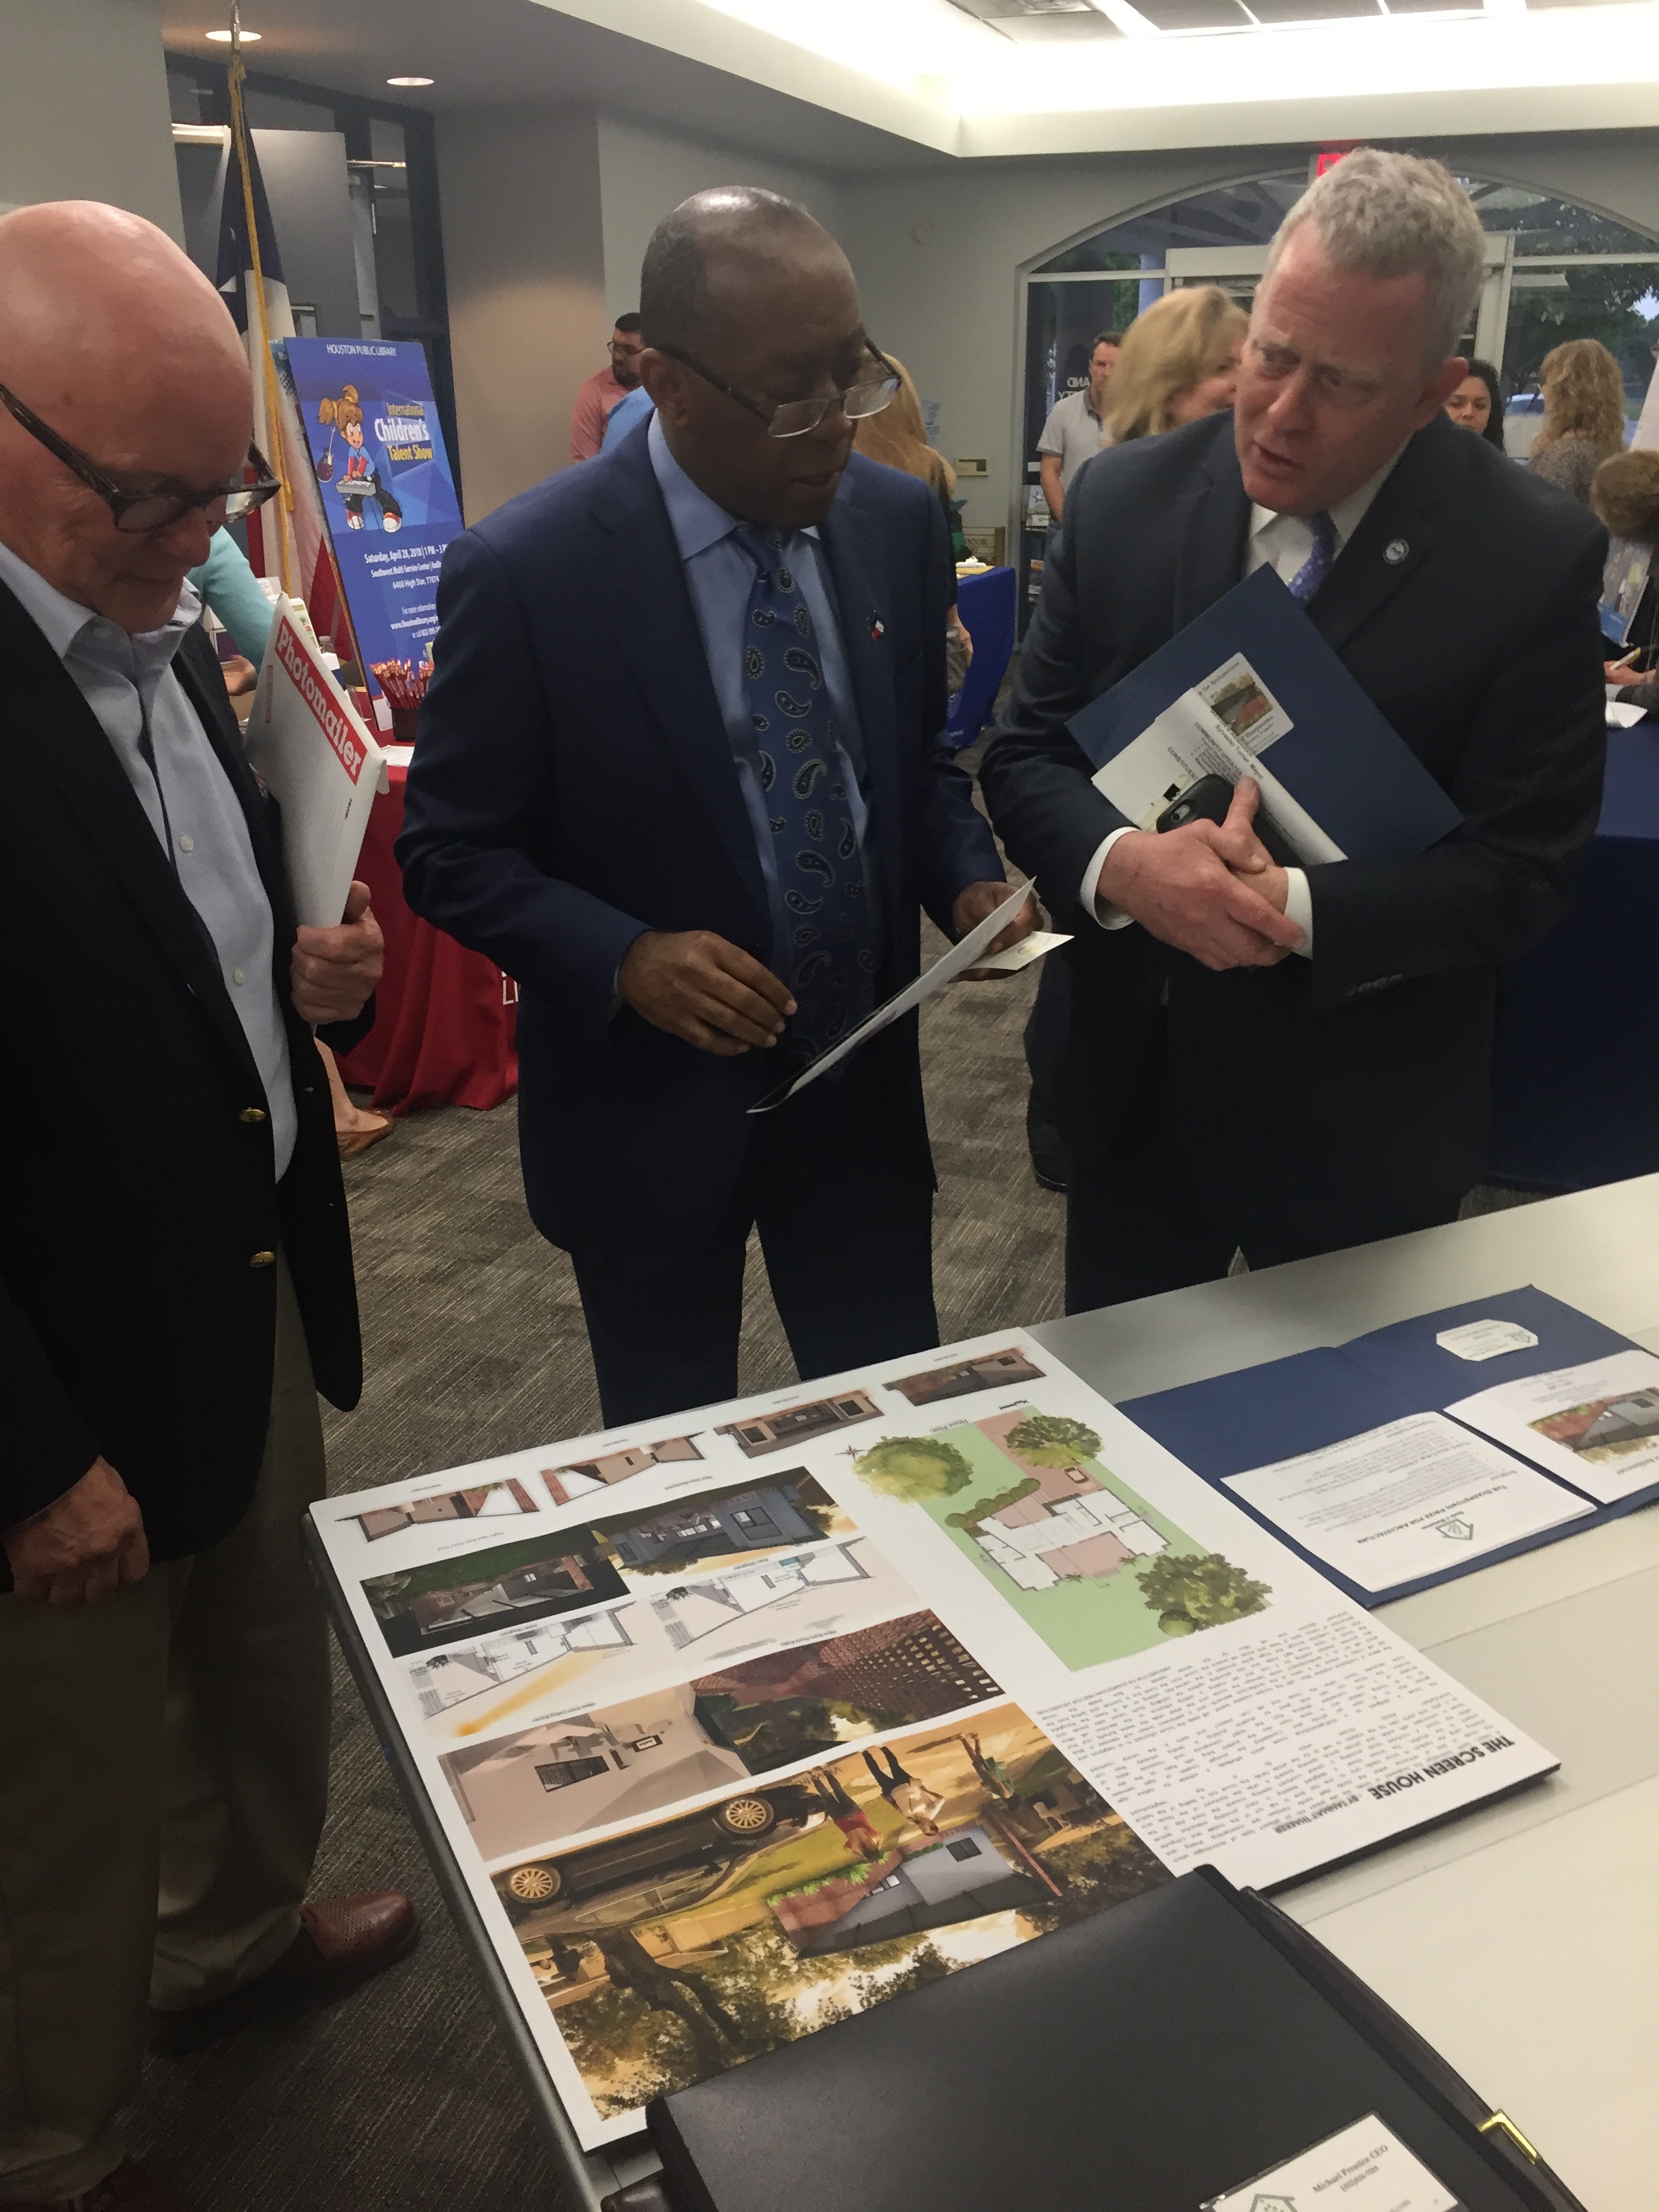   Michael Prentice showing display of winning design for the Sharpstown Prize for Architecture to Houston Mayor Sylvester Turner and Houston City Councilman David Robinson during the District J community meeting.  